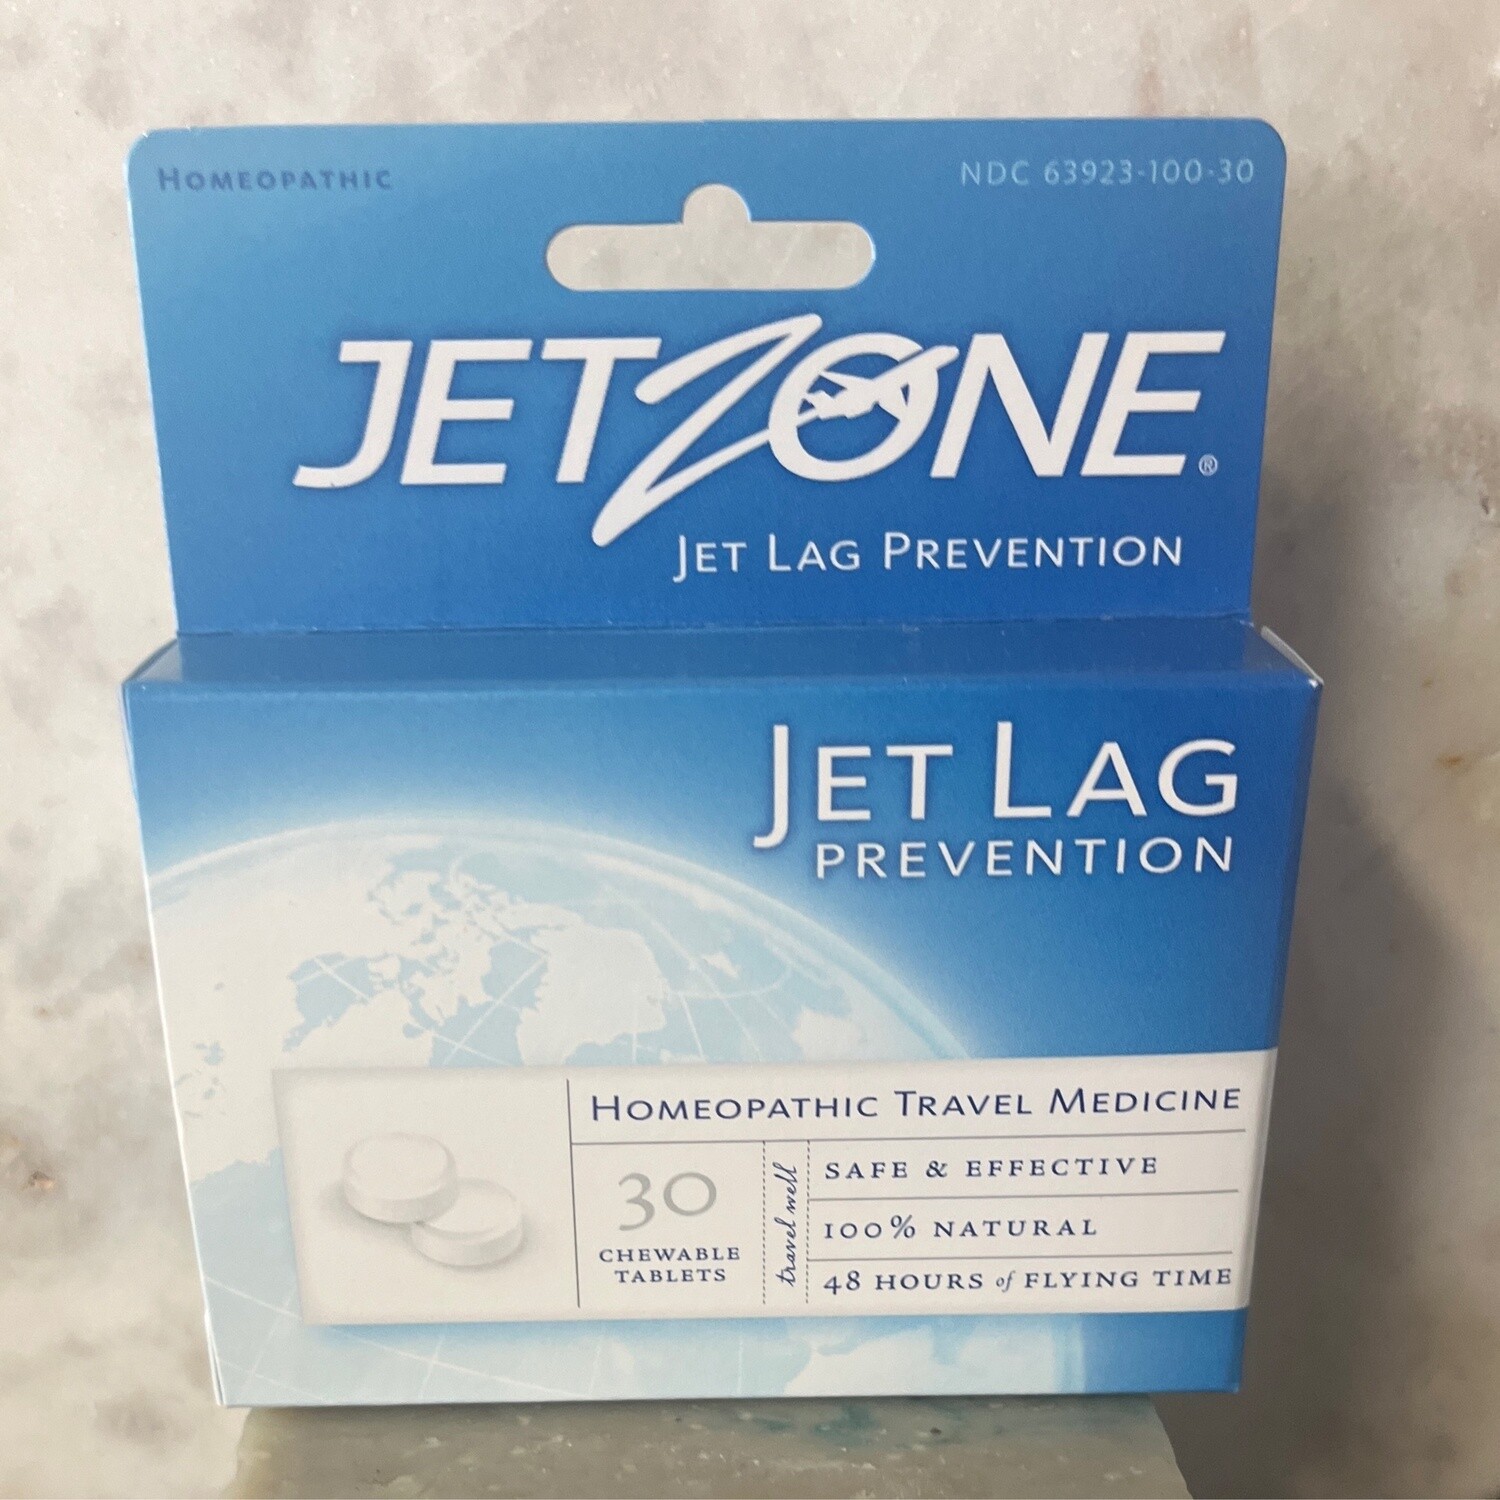 JetZone Jet Lag Prevention - Natural Homeopathic OTC Travel and Jet Lag Remedy - 30 Chewable Tablets - Jet Lag Remedy - 48 Hours Flying Time - Pleasant Taste - All Natural - Effective